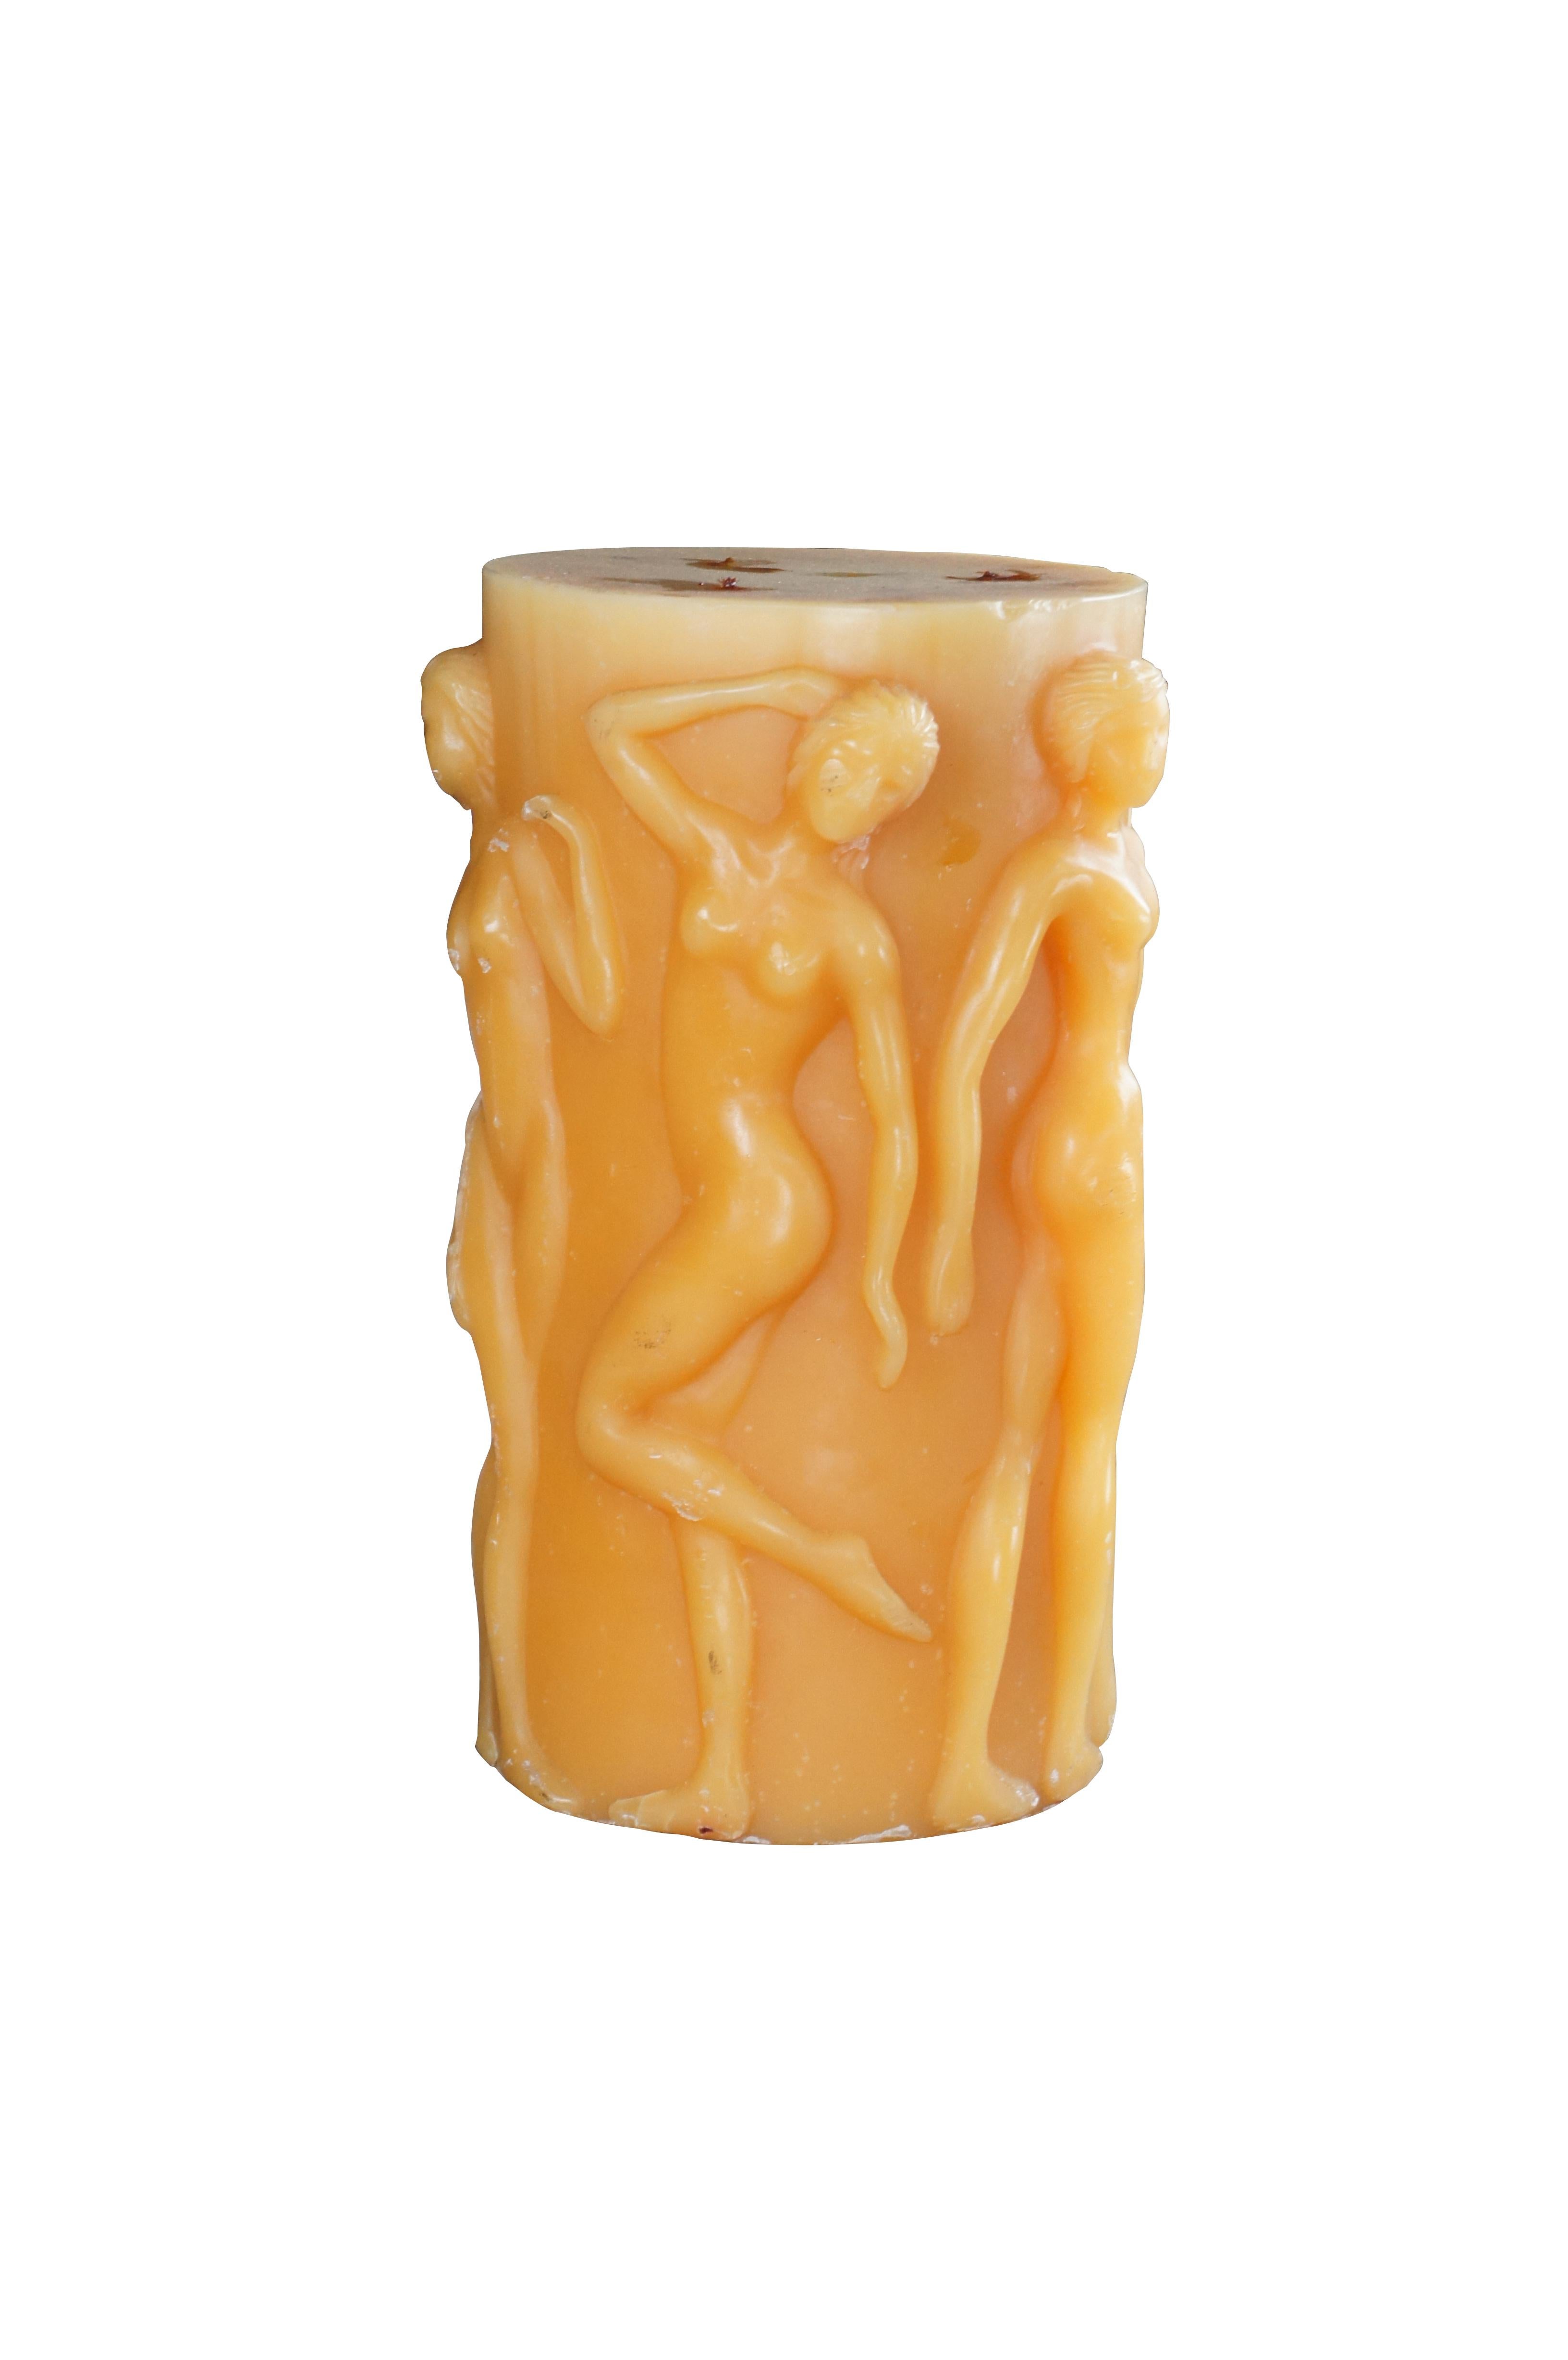 Intira Candle Factory figural nude cylindrical candle. Styled after Lalique 